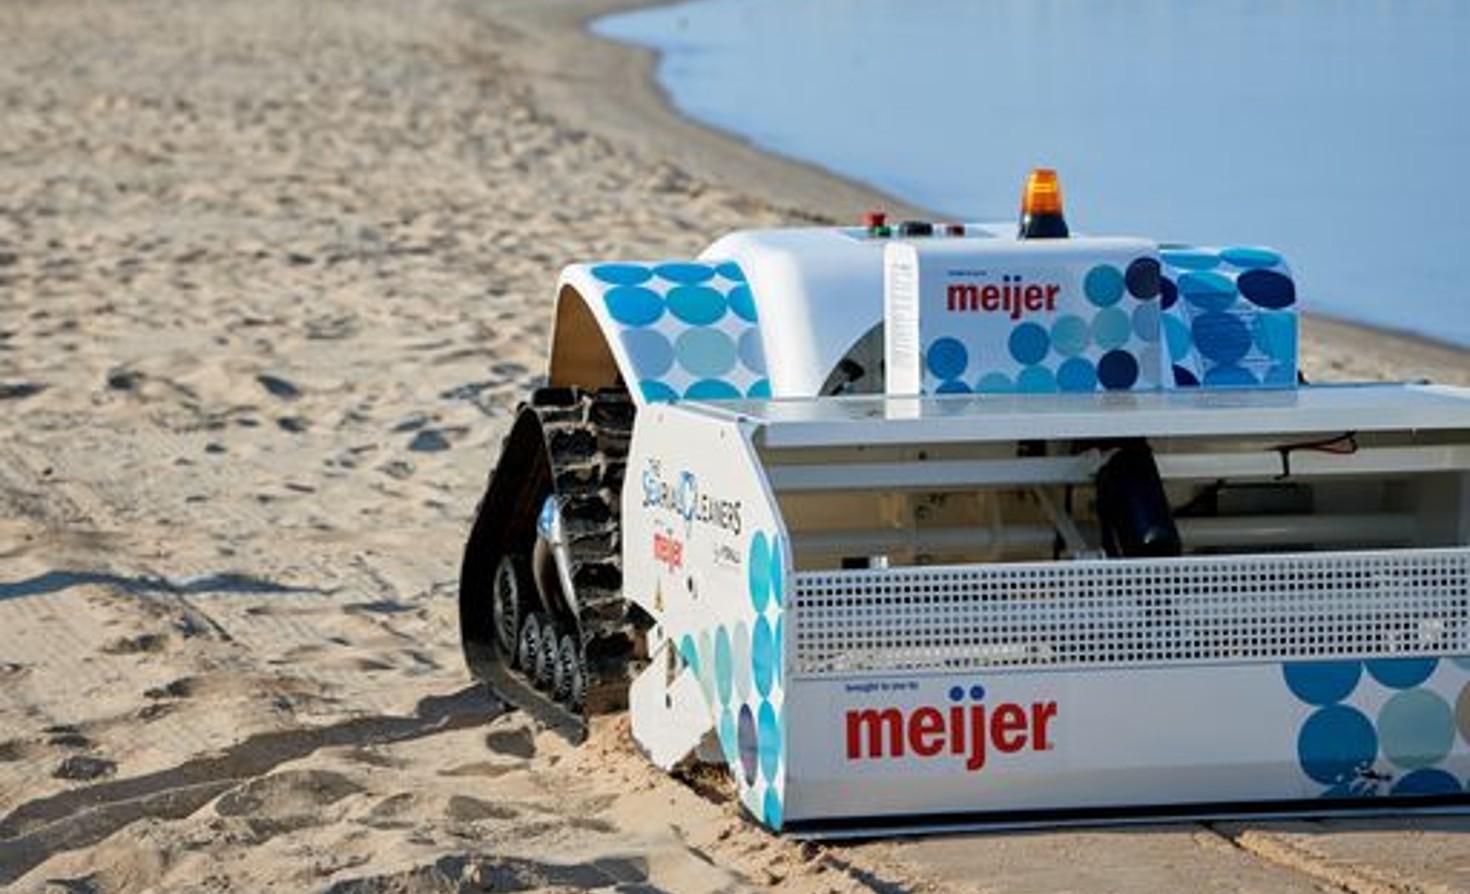 The BeBot sand-sifting drone with Meijer branding.